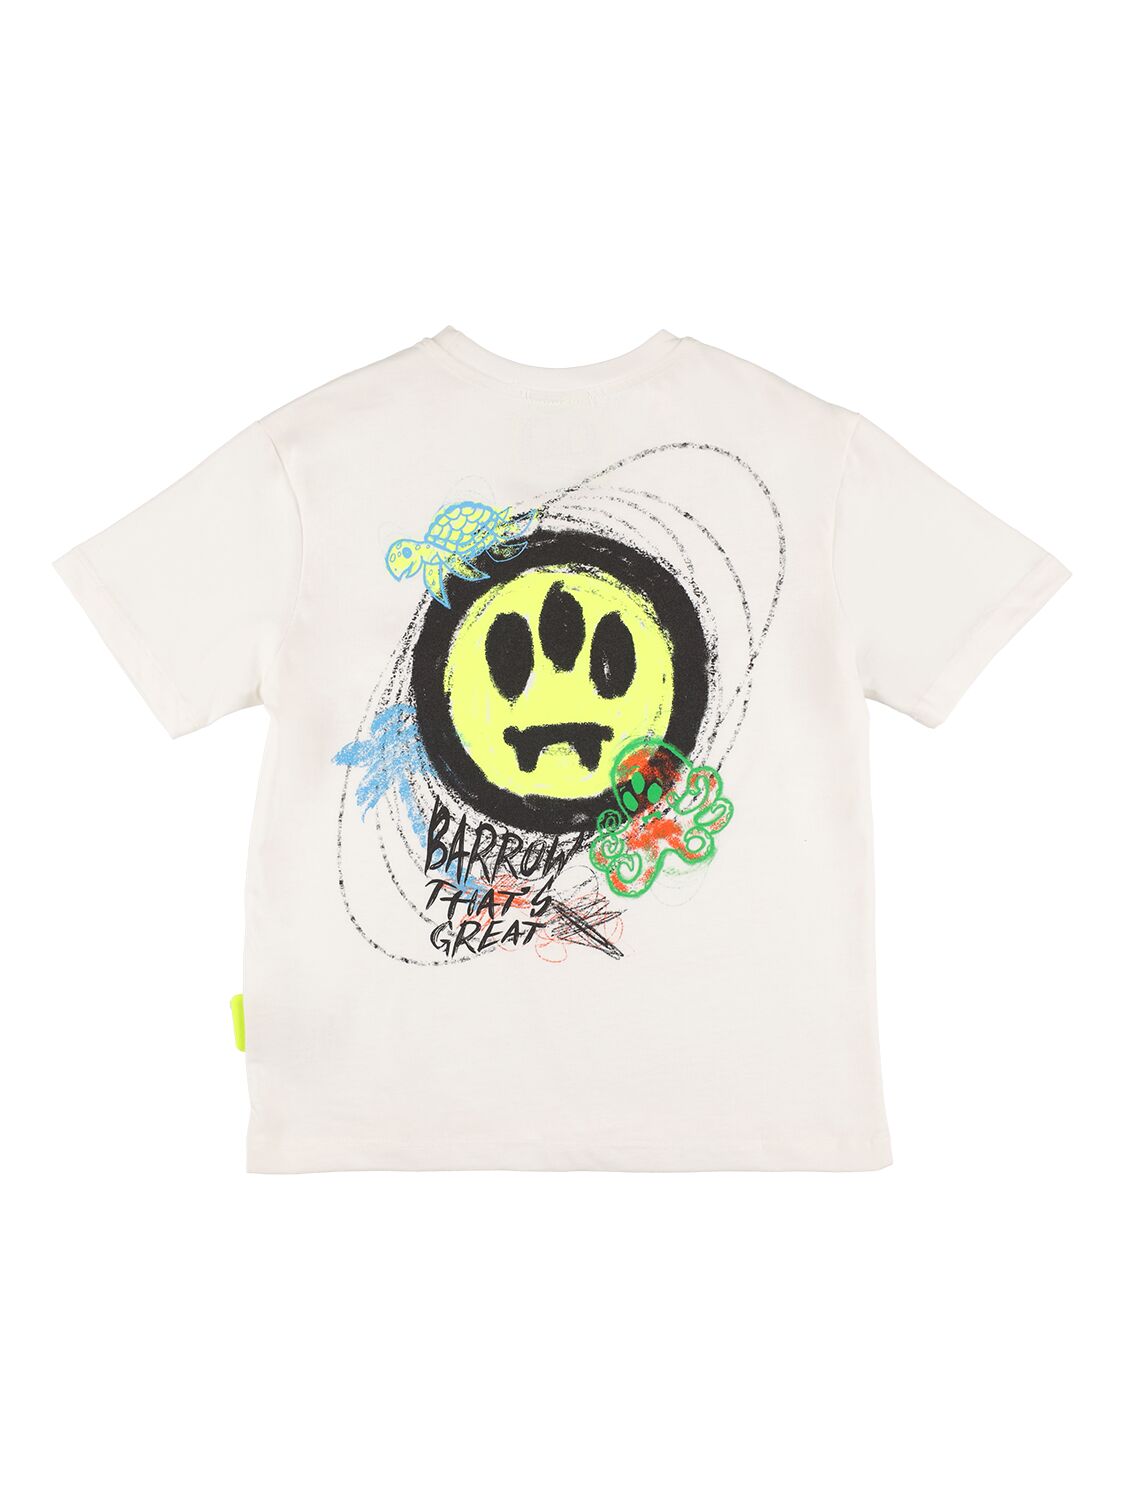 Barrow Kids' Printed Cotton Jersey T-shirt In Off-white